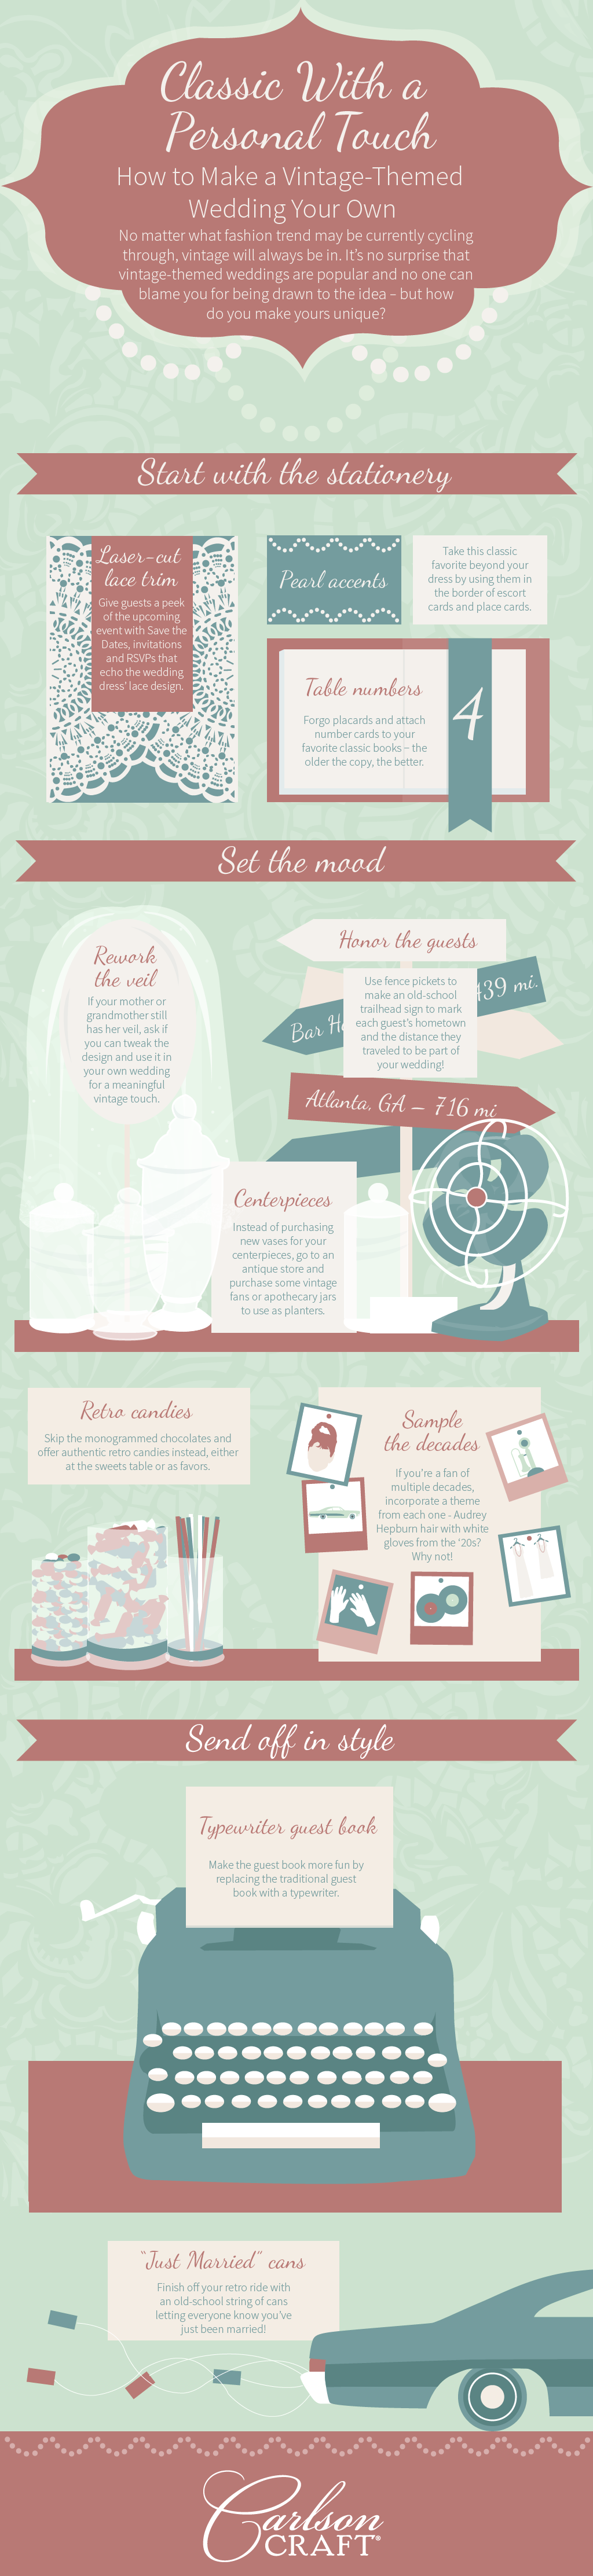 Looking to the past as your step into your future together? Then a vintage wedding is for you. Check out these tips and make your vintage wedding personal and unique.